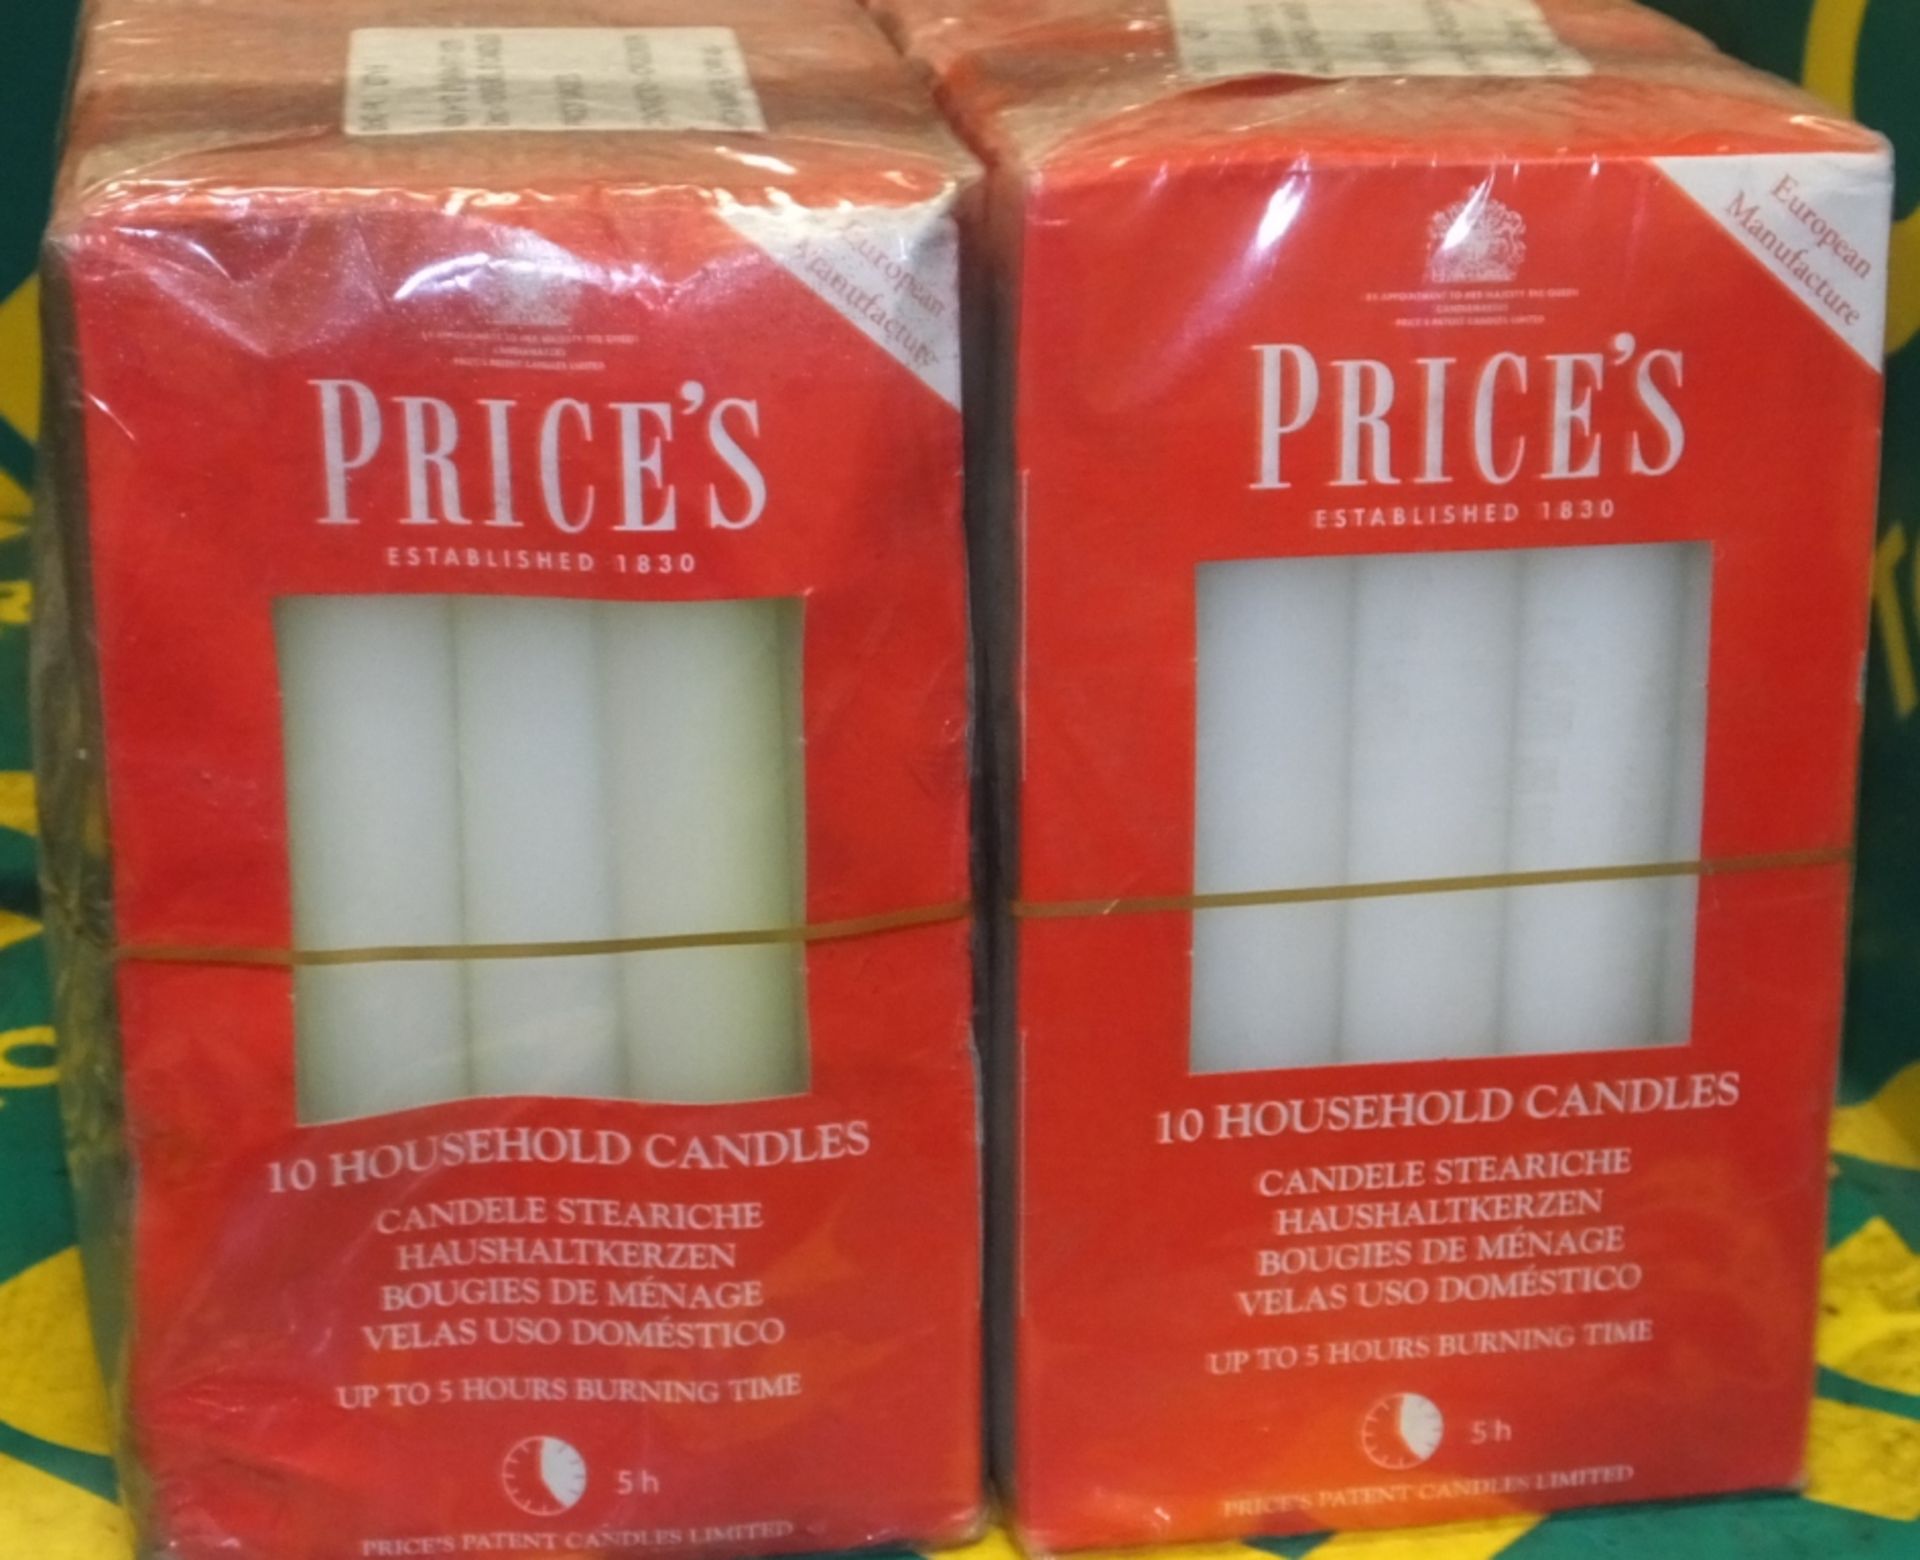 Prices Househpld Candles - 10 per box - 6 boxes per pack - 2 packs - Image 2 of 2